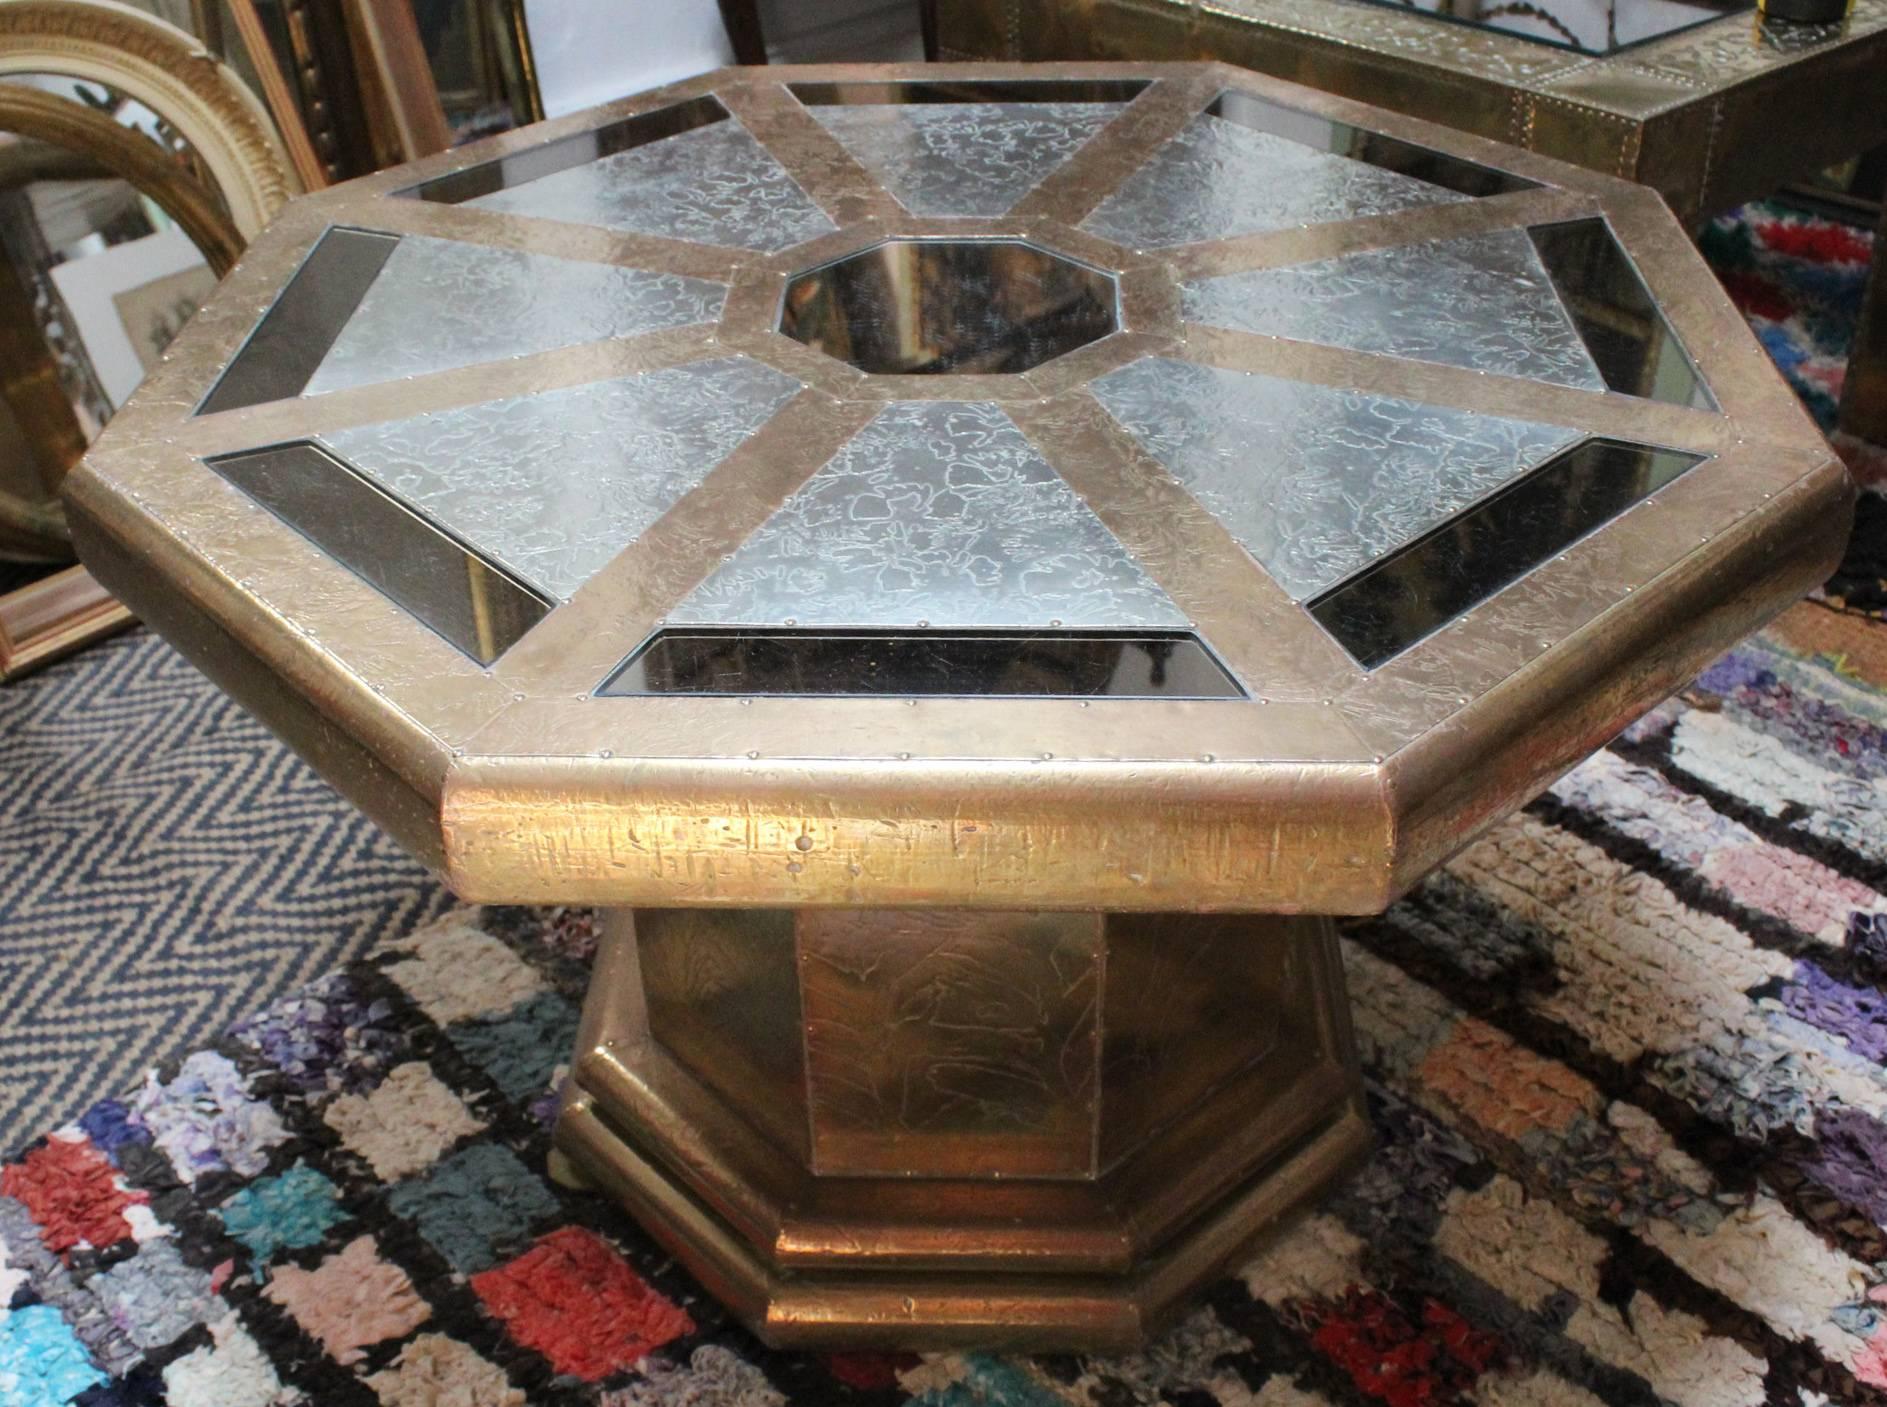 Rodolfo Dubarry’s 1970s Spanish gilded octagonal coffee table with mirrors made up of hand worked stamped golden and silvered brass panels and smoked mirrors.
 